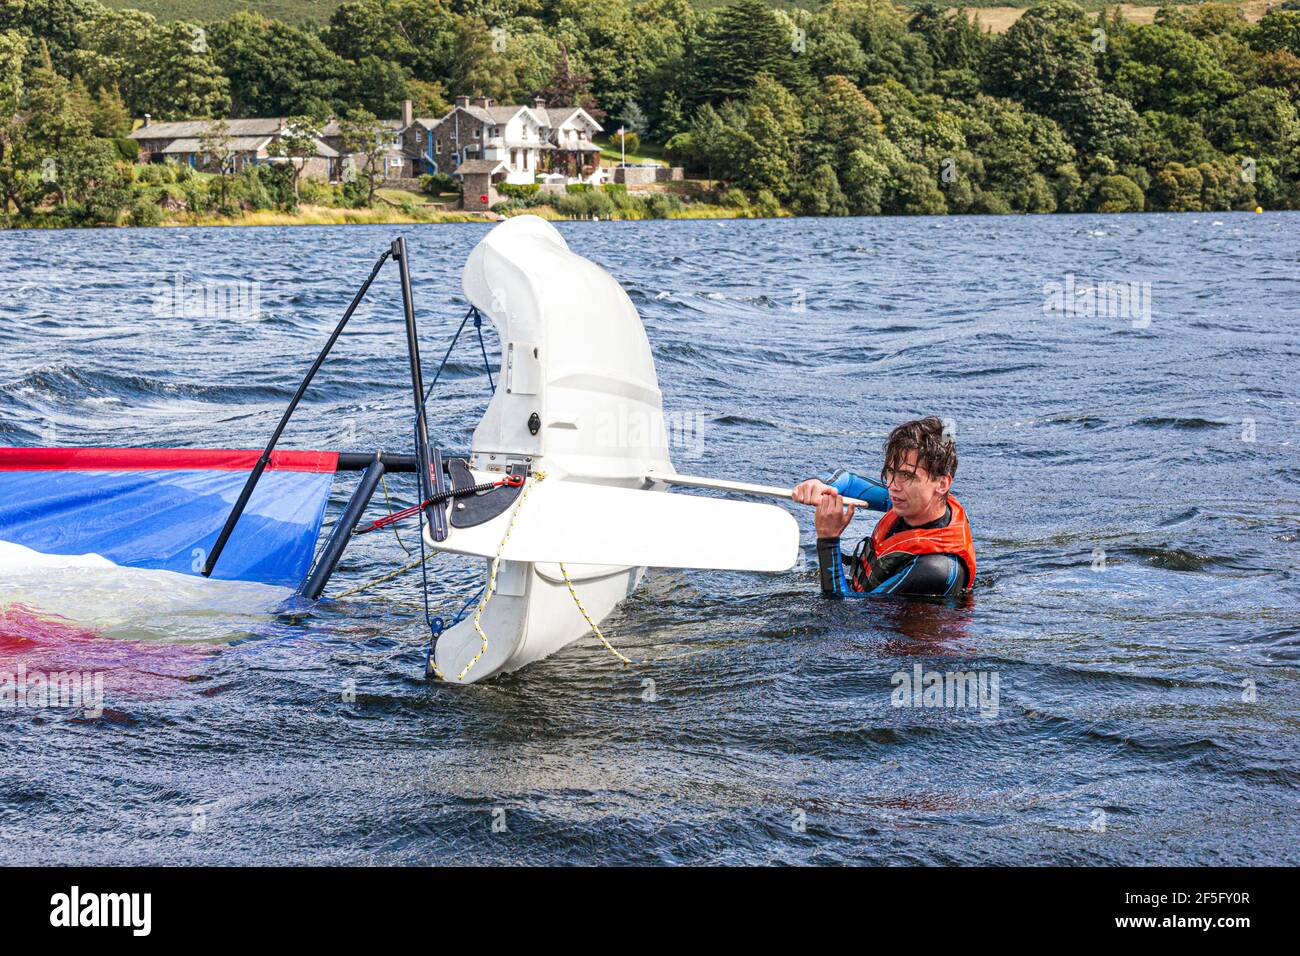 The English Lake District - Sailing on Ullswater, Cumbria UK - A young man about to right a dinghy after capsizing Stock Photo